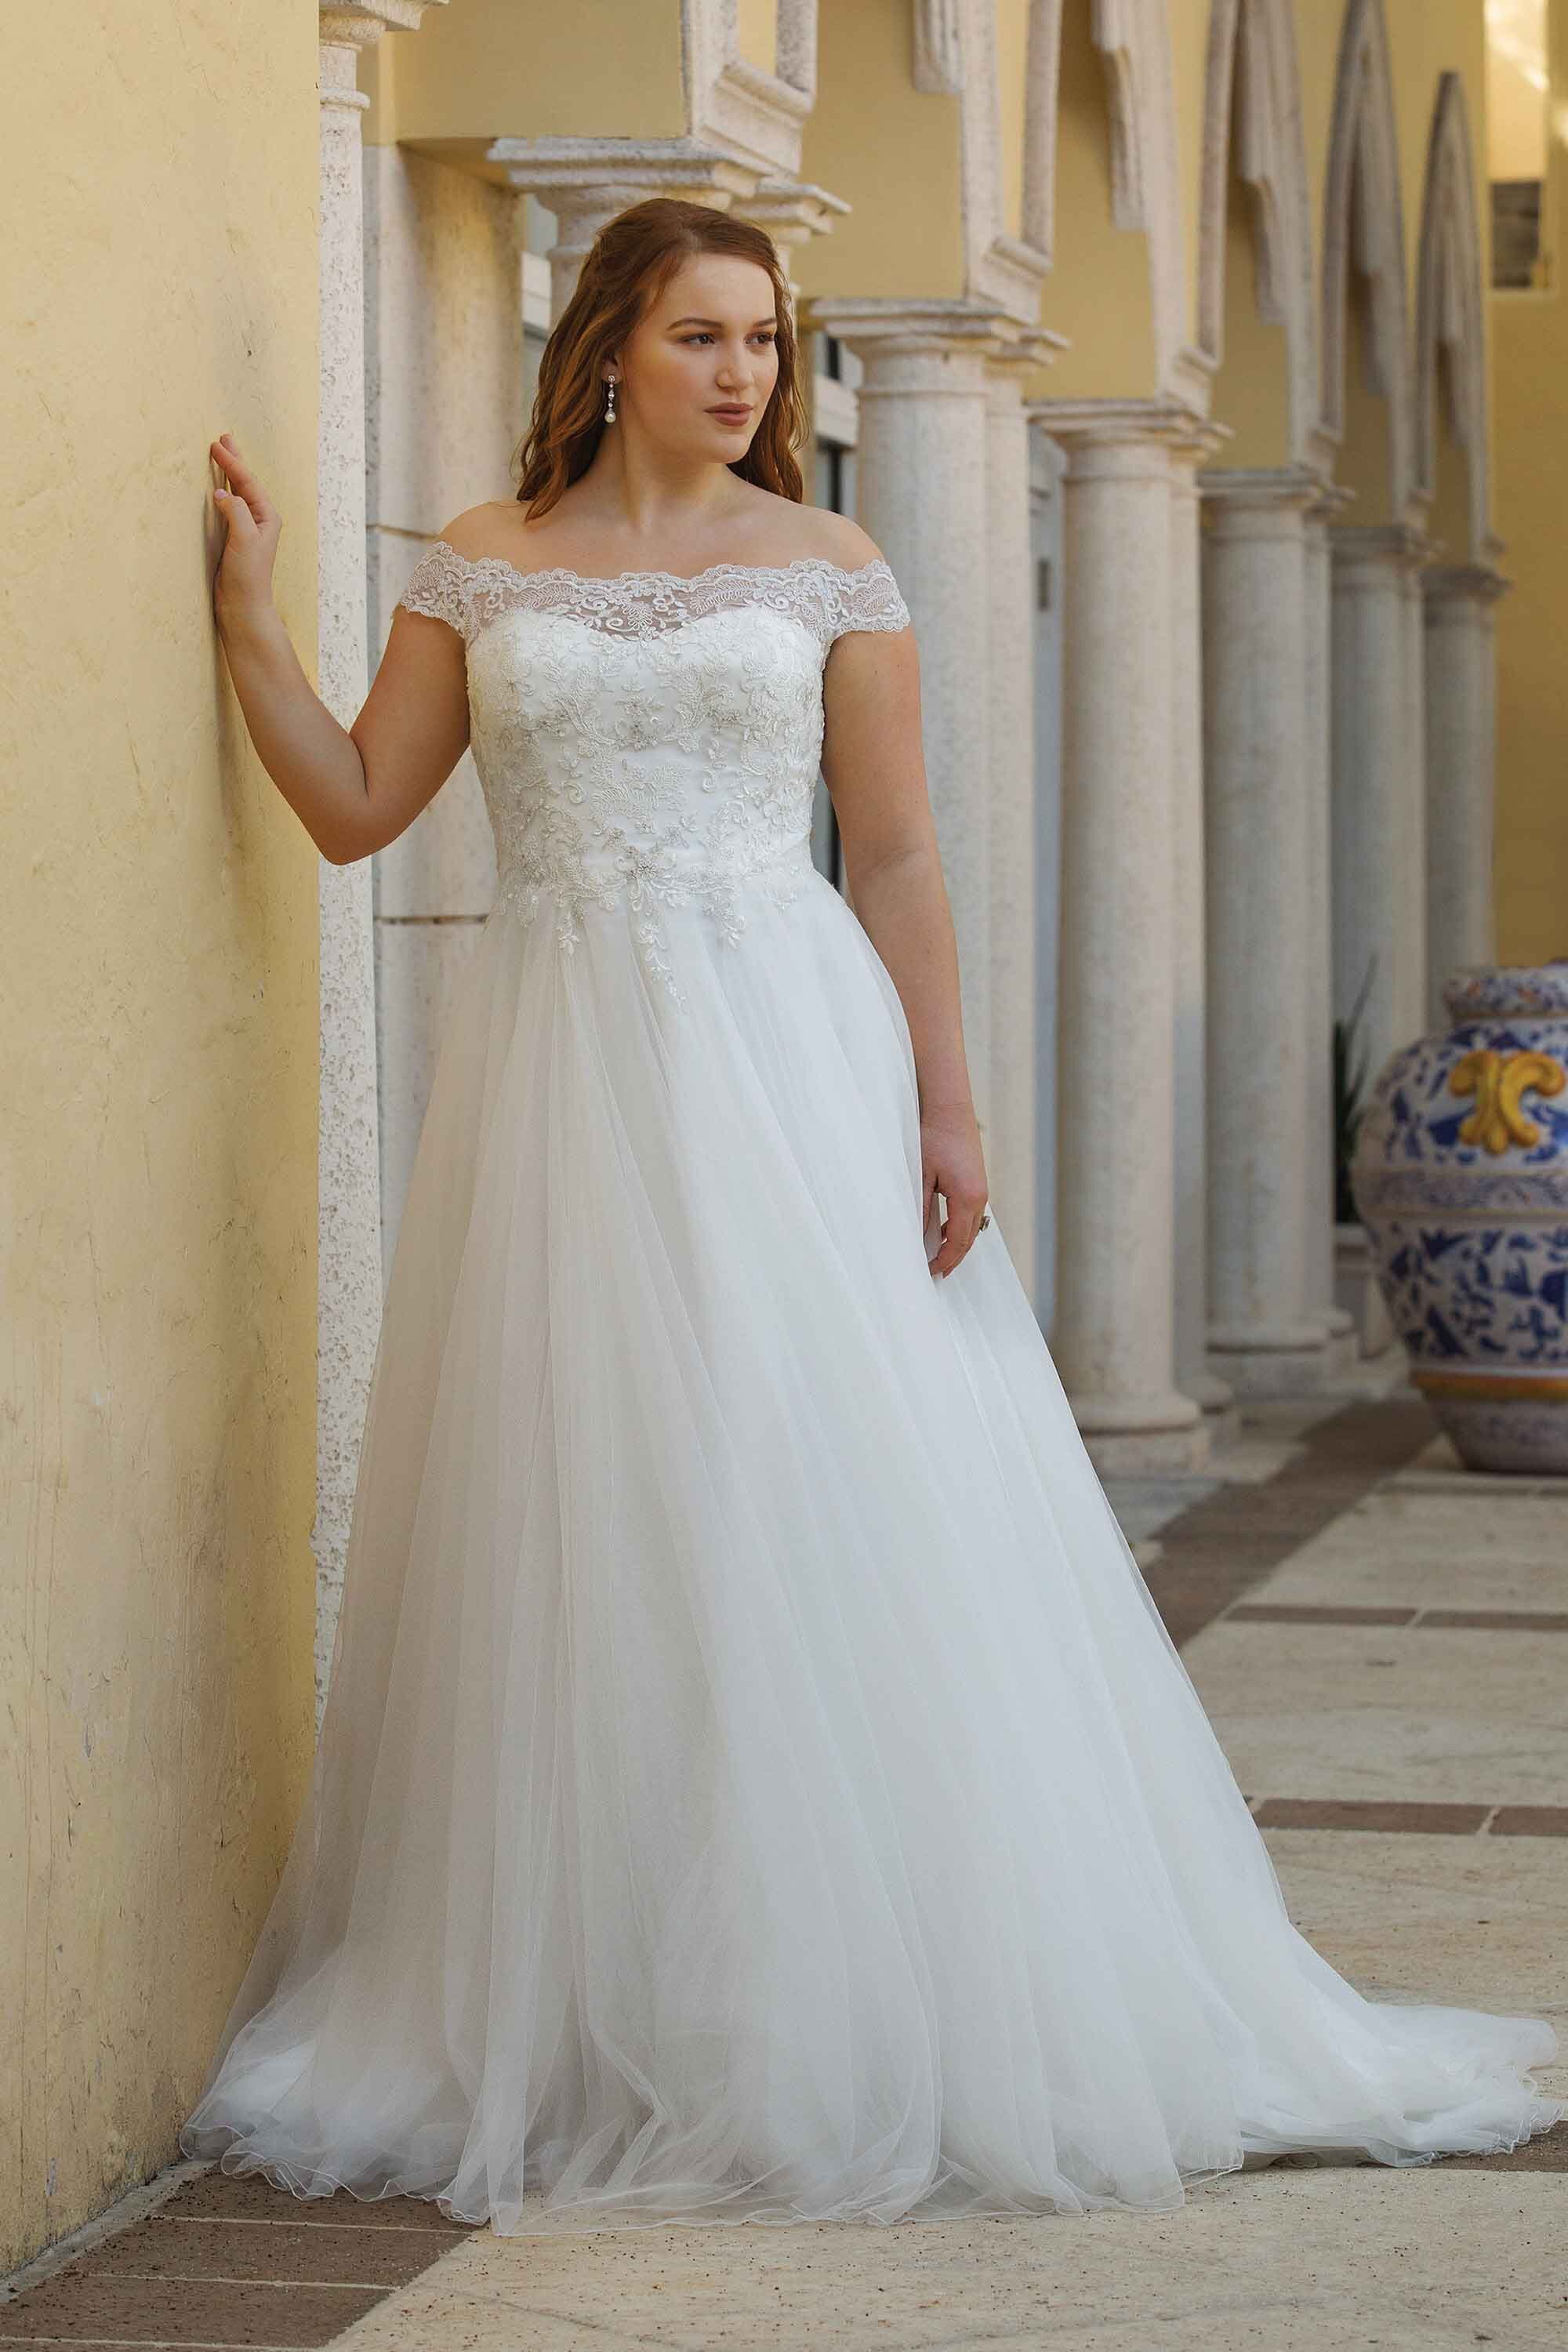 Retro wedding dresses off the shoulder short sleeve A-line satin traditional  bridal gowns with sweep train – Dbrbridal